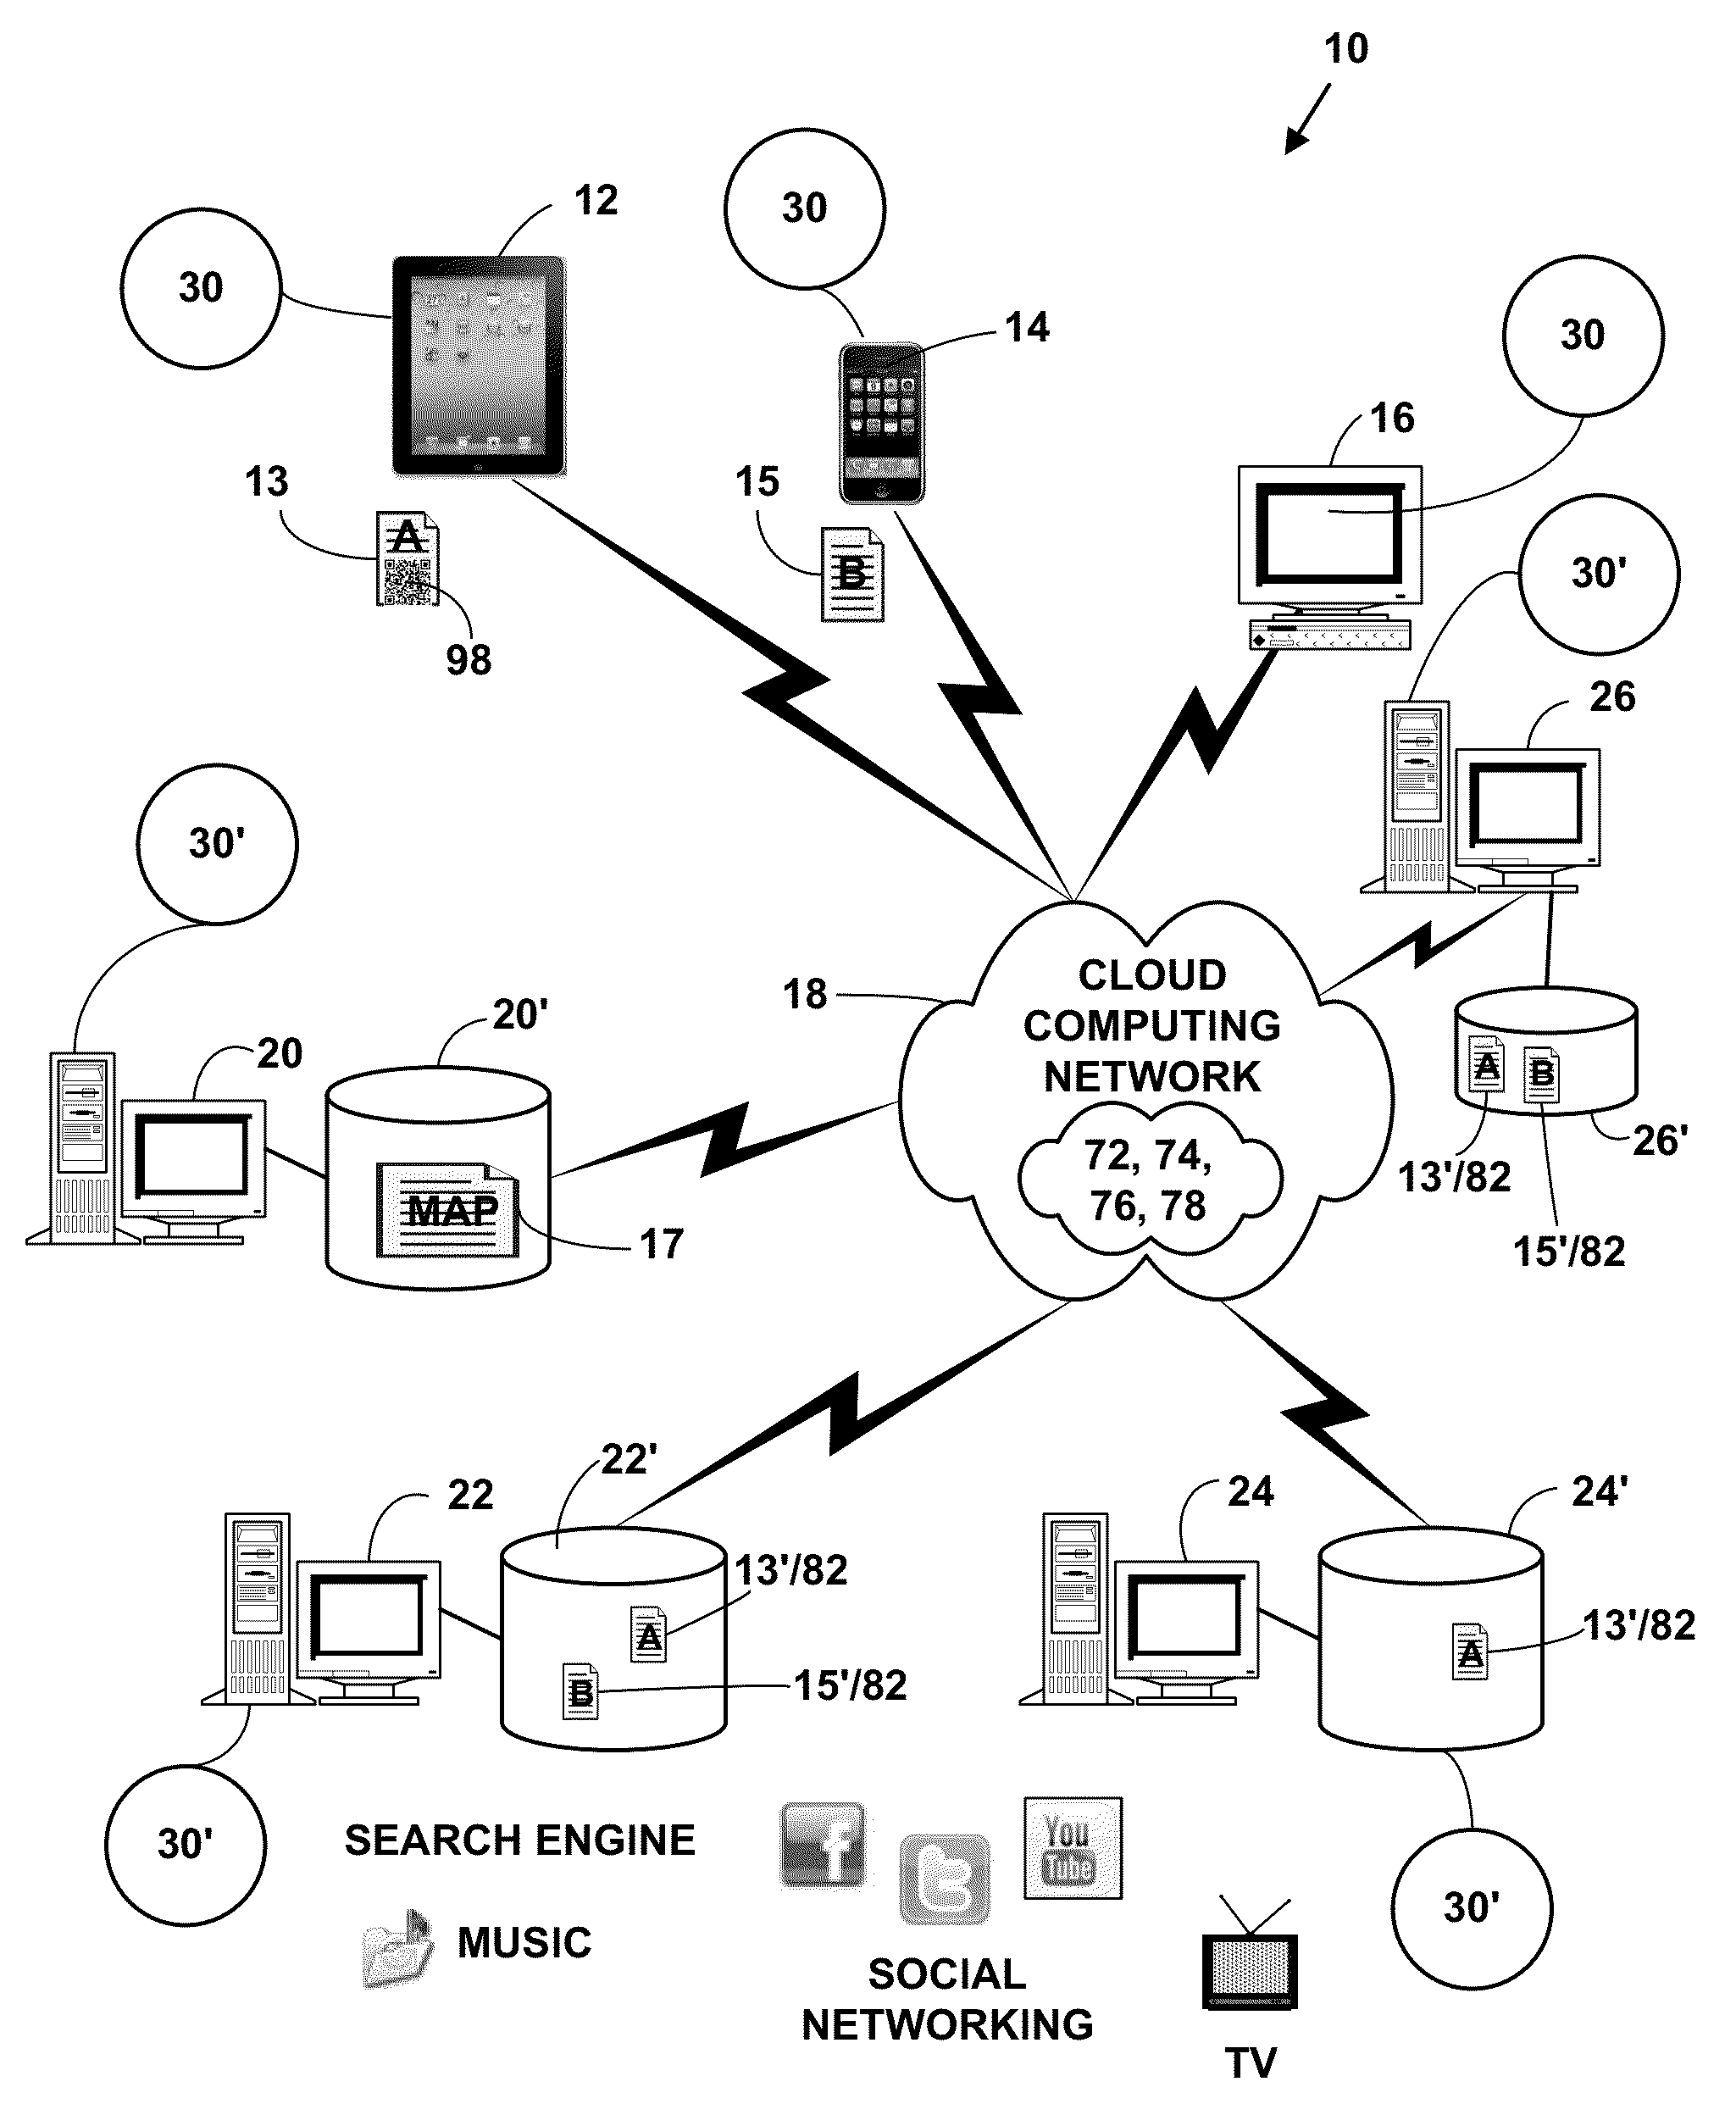 Method and system for electronic content storage and retrieval using galois fields and information entropy on cloud computing networks